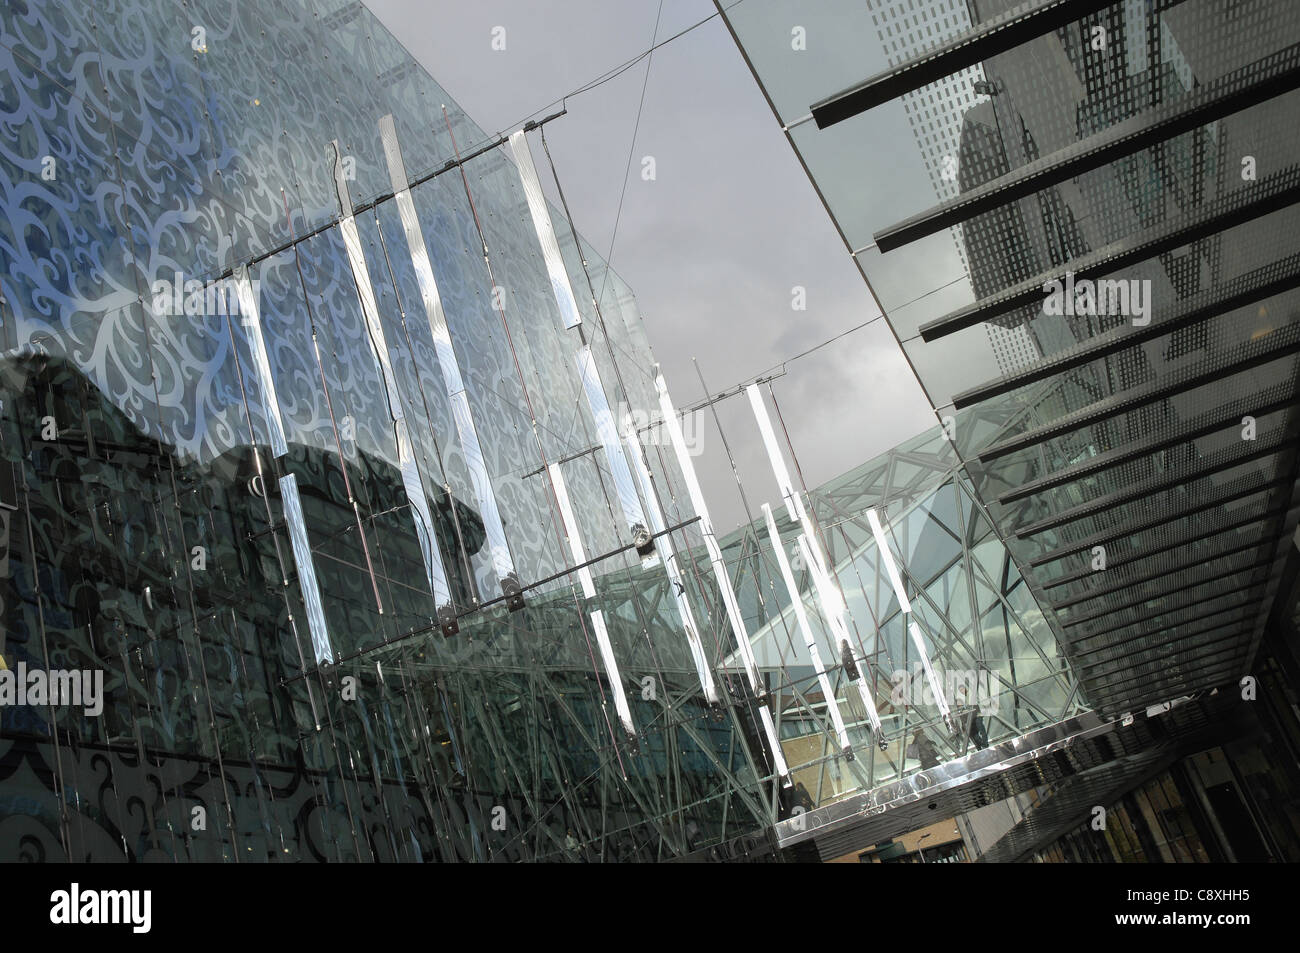 Highcross shopping center, Leicester. Exterior image taken in dramatic winter light. Glass and reflective surfaces add impact. Stock Photo